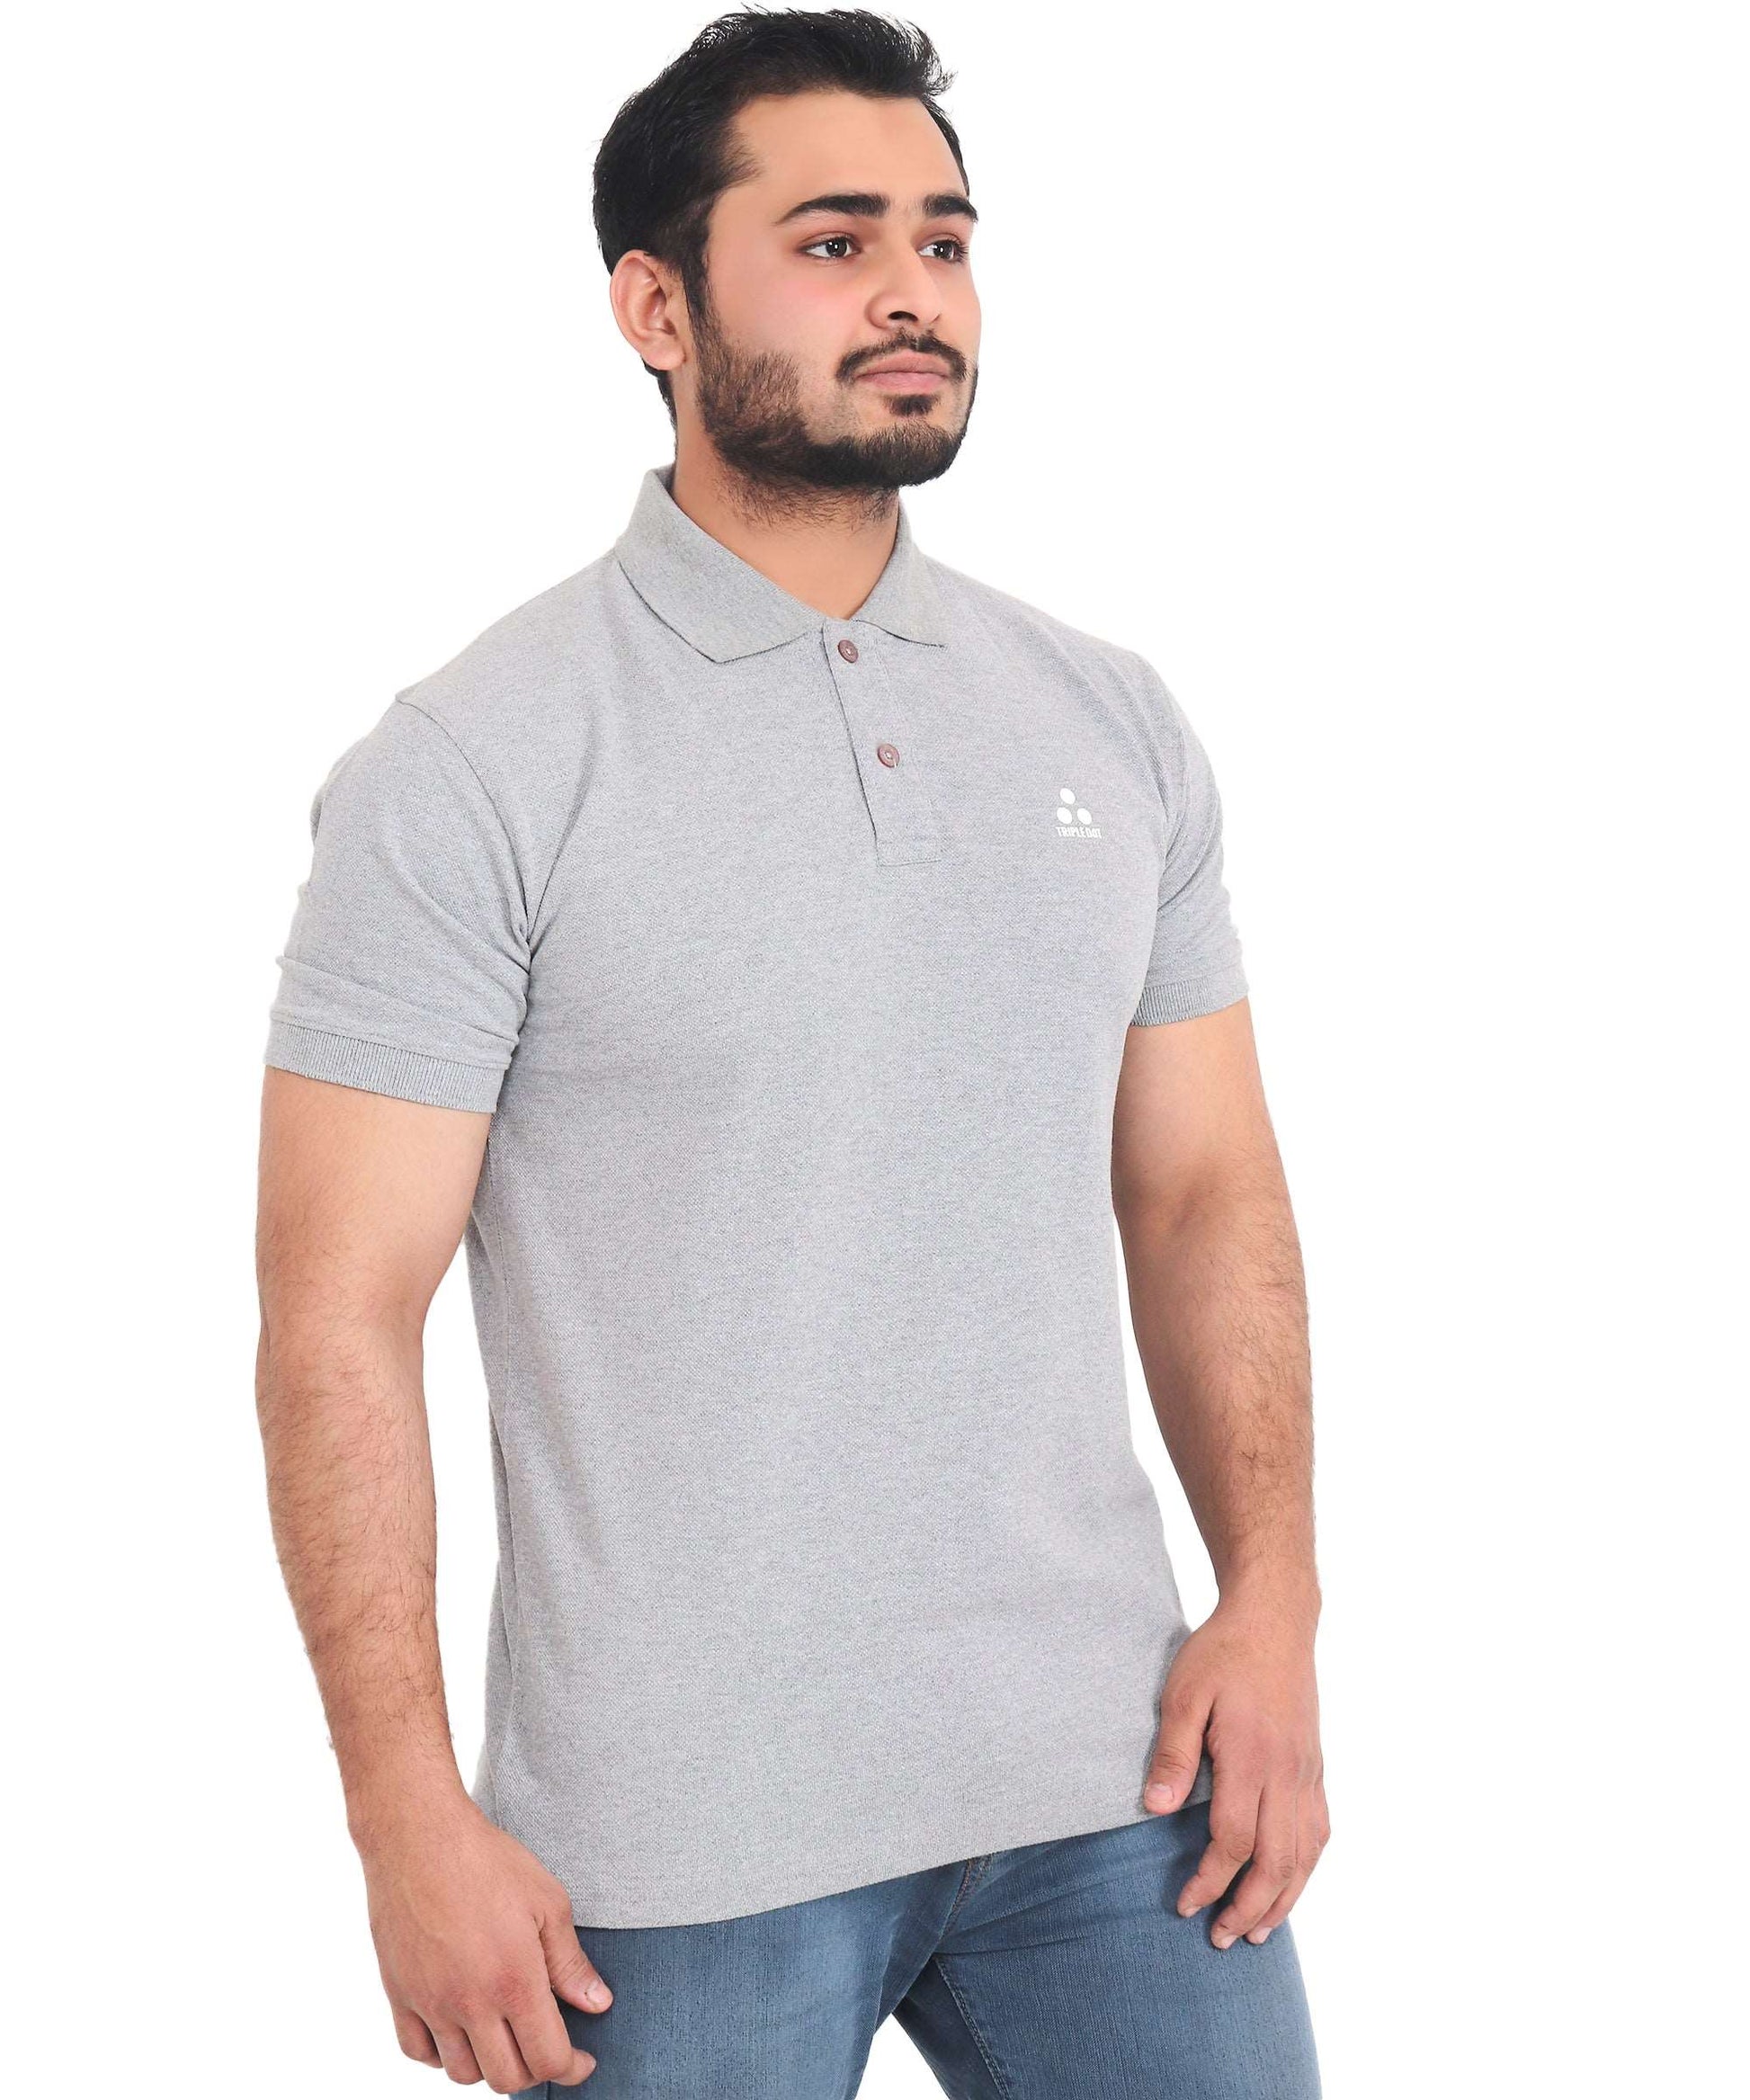 Classy and Comfortable: Men's Grey Polo Neck T-shirt